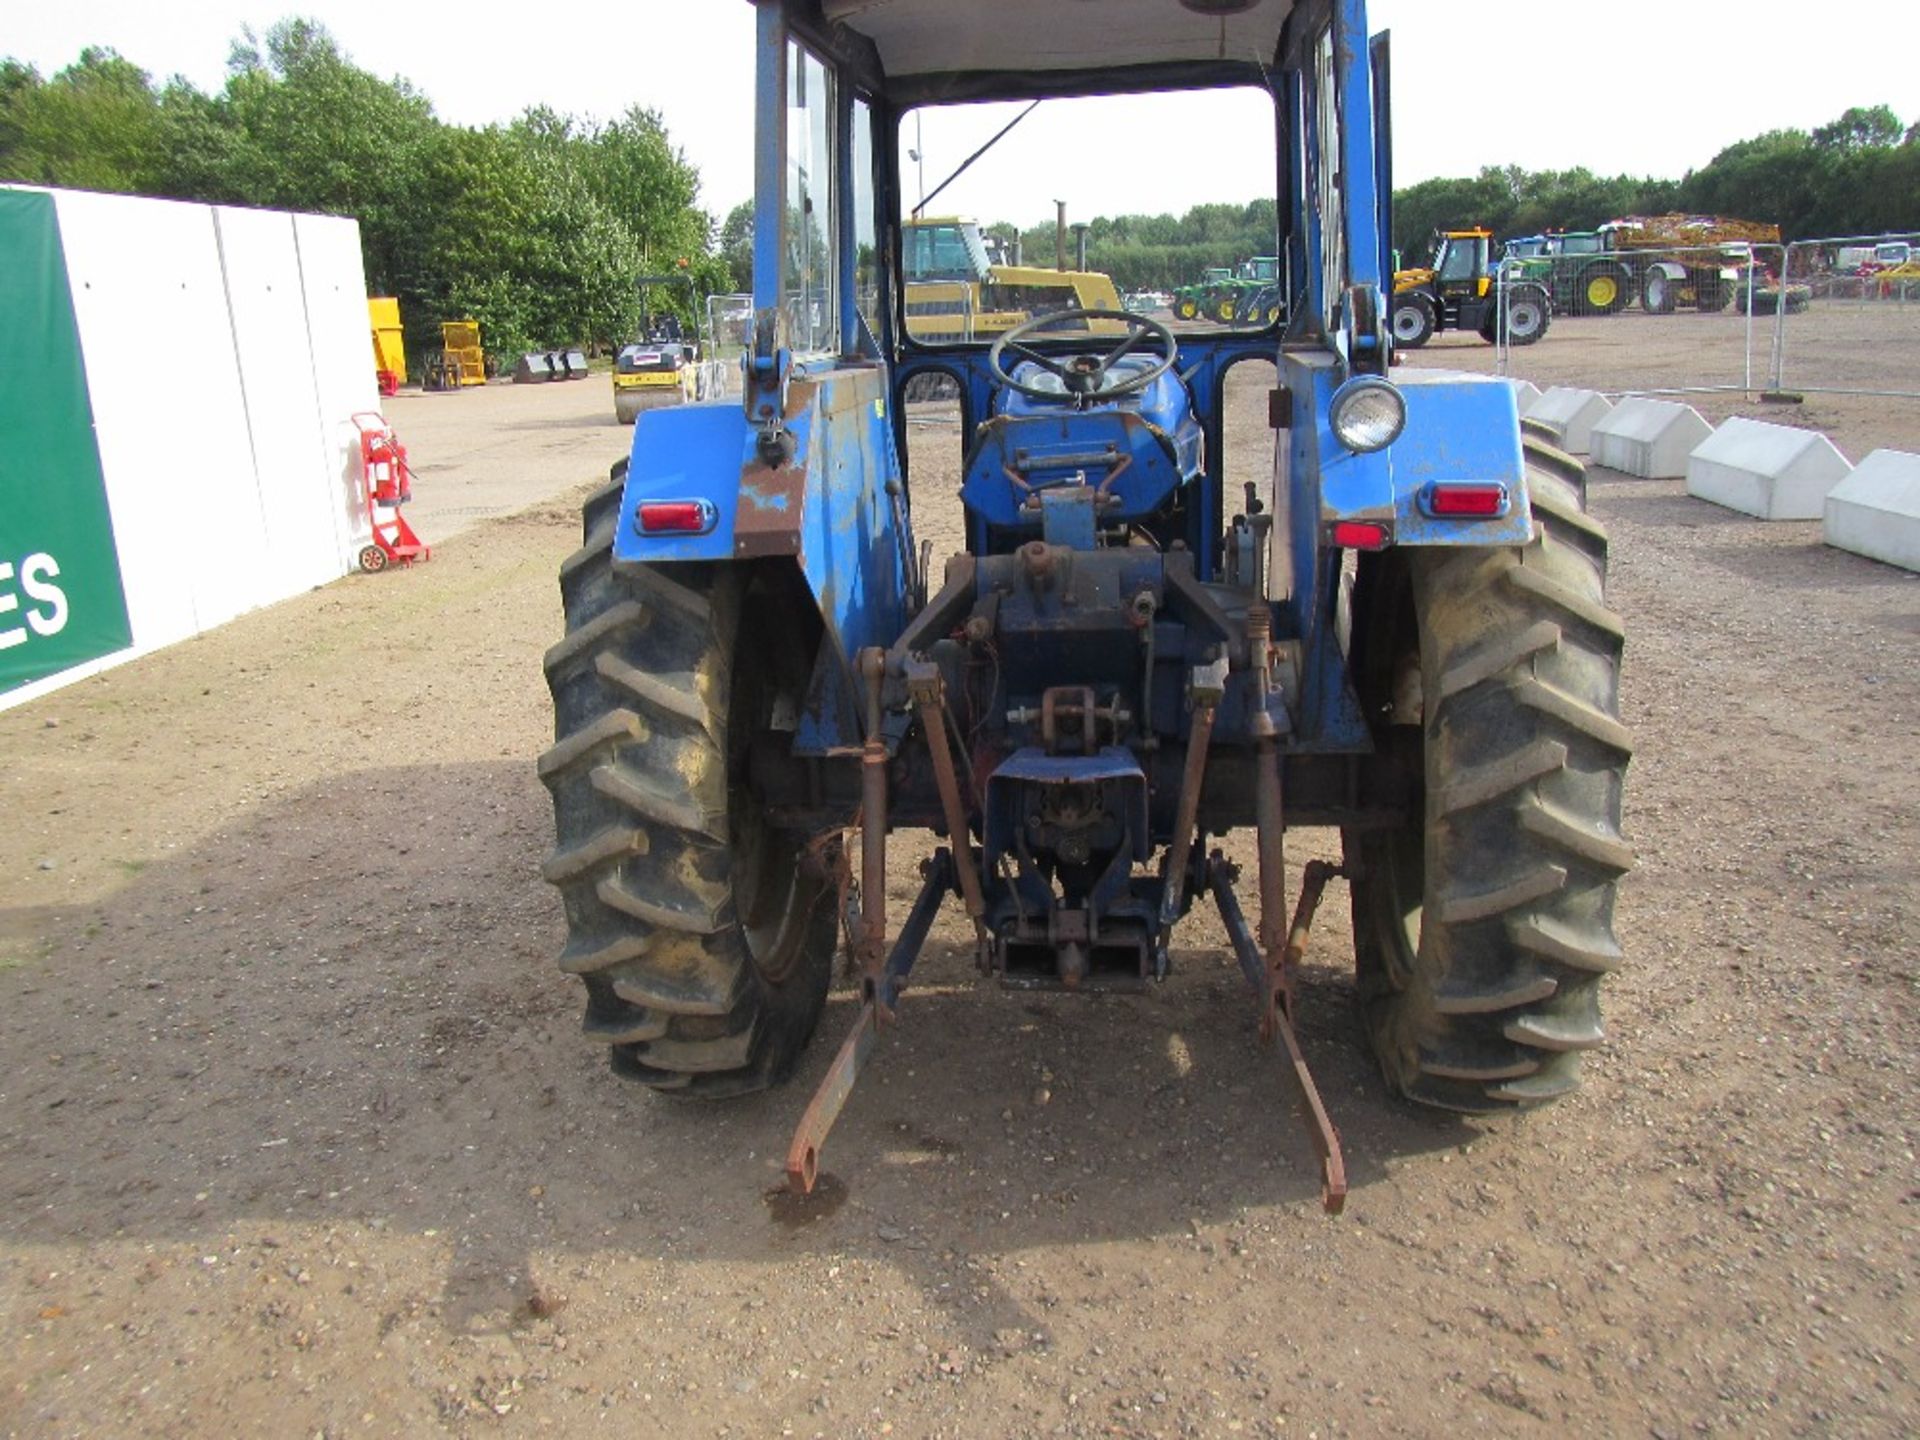 Leyland 384 2wd Tractor with Weights Reg No TJL 962K Ser No 301729 UNRESERVED LOT - Image 6 of 16